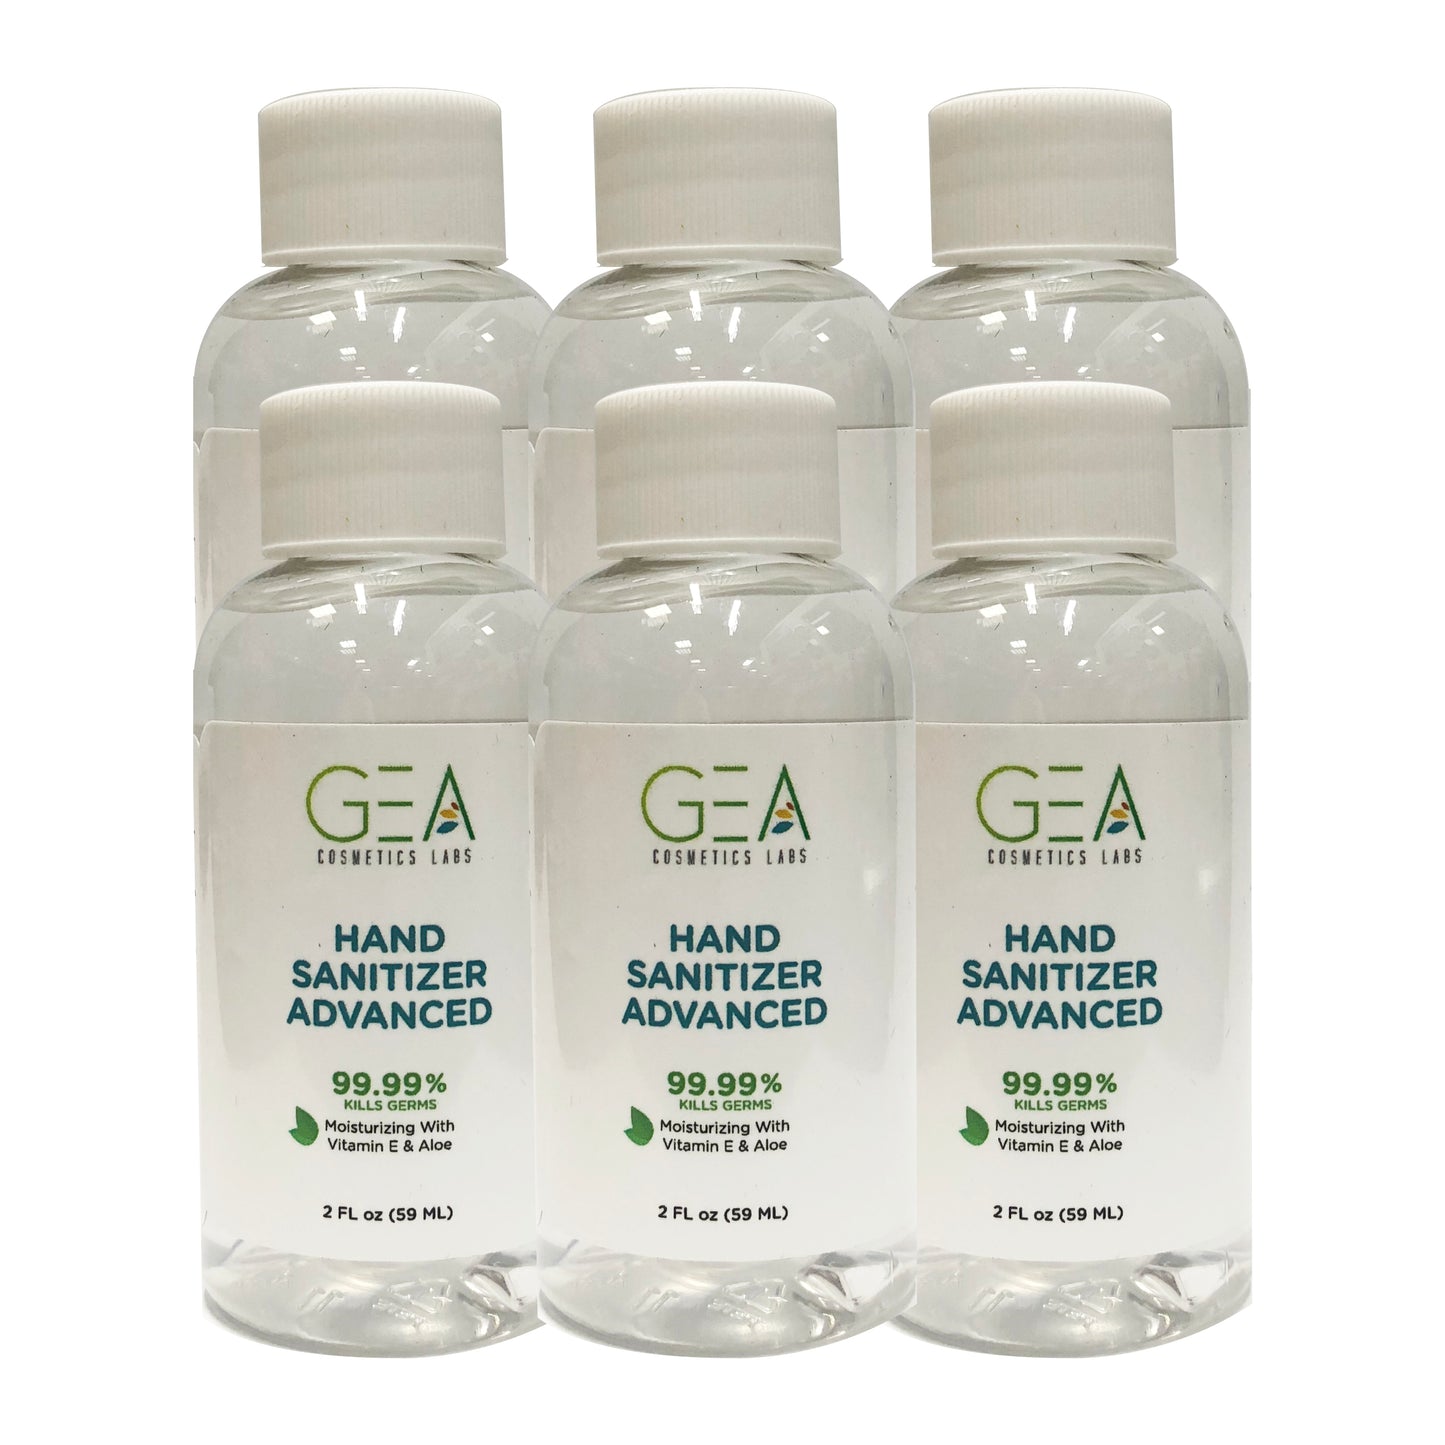 Hand Sanitizer Advanced 2 oz Ethyl Alcohol 70% "6-PACK" by Gea Cosmetics Labs